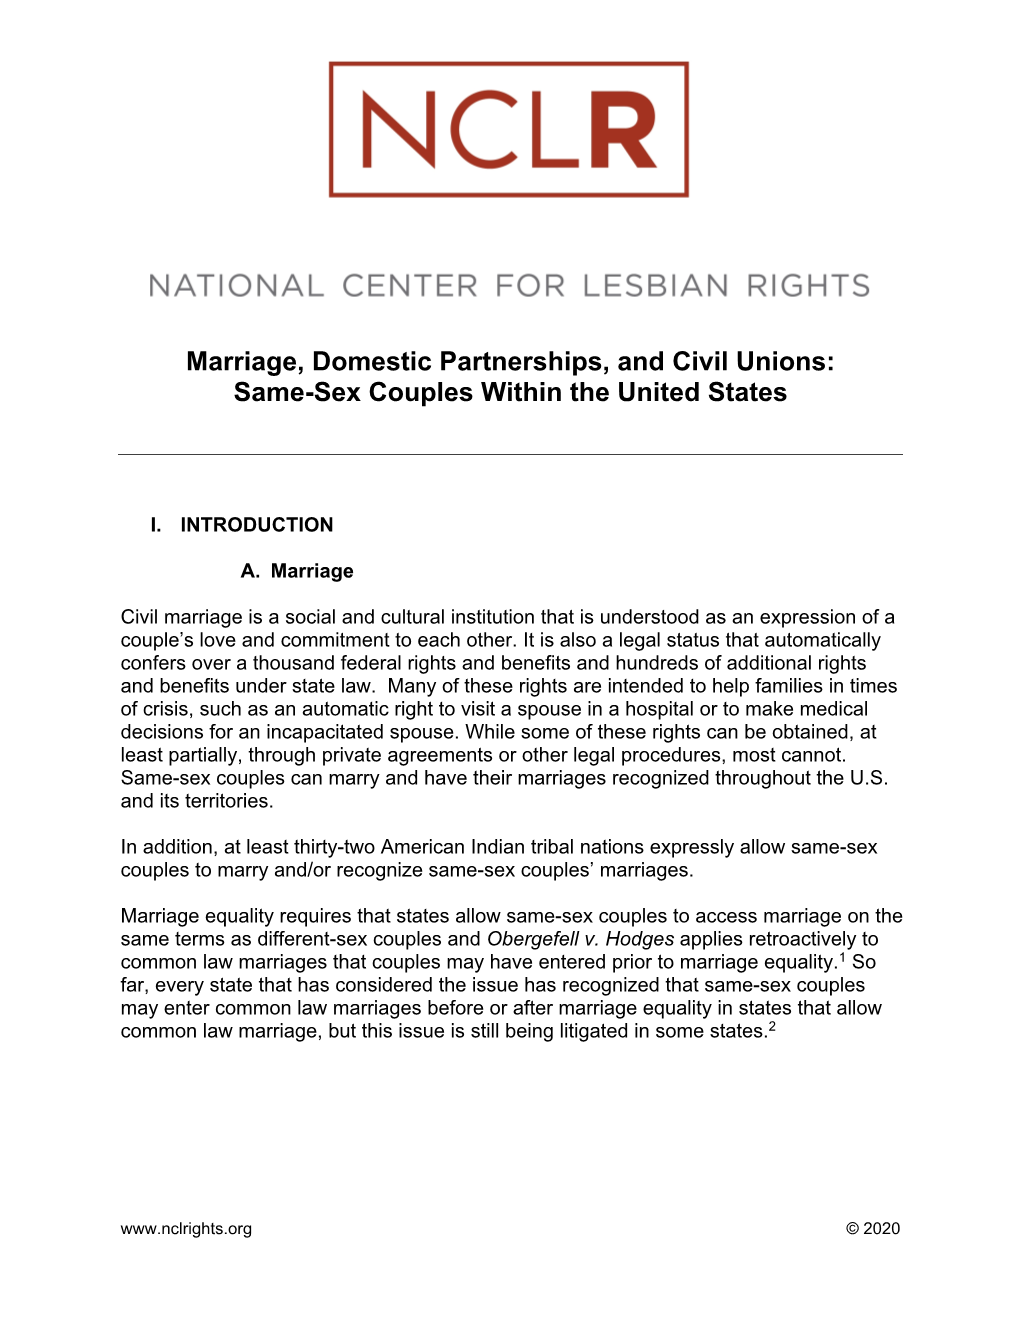 Marriage, Domestic Partnerships, and Civil Unions: Same-Sex Couples Within the United States